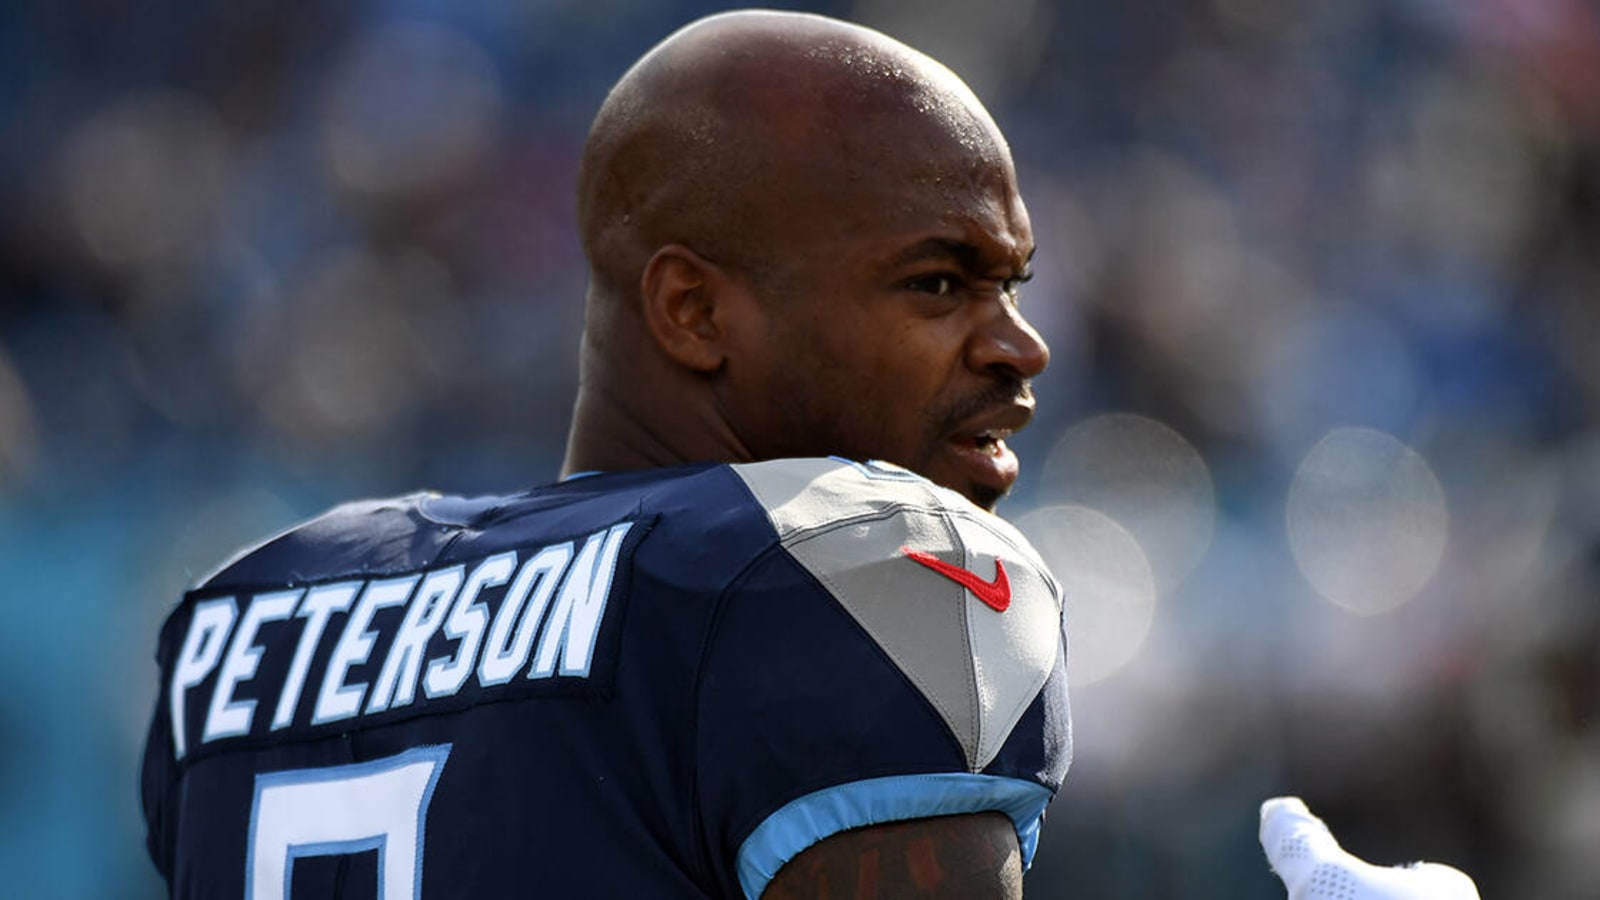 Adrian Peterson shoots down report he’s selling NFL trophies and memorabilia in estate sale